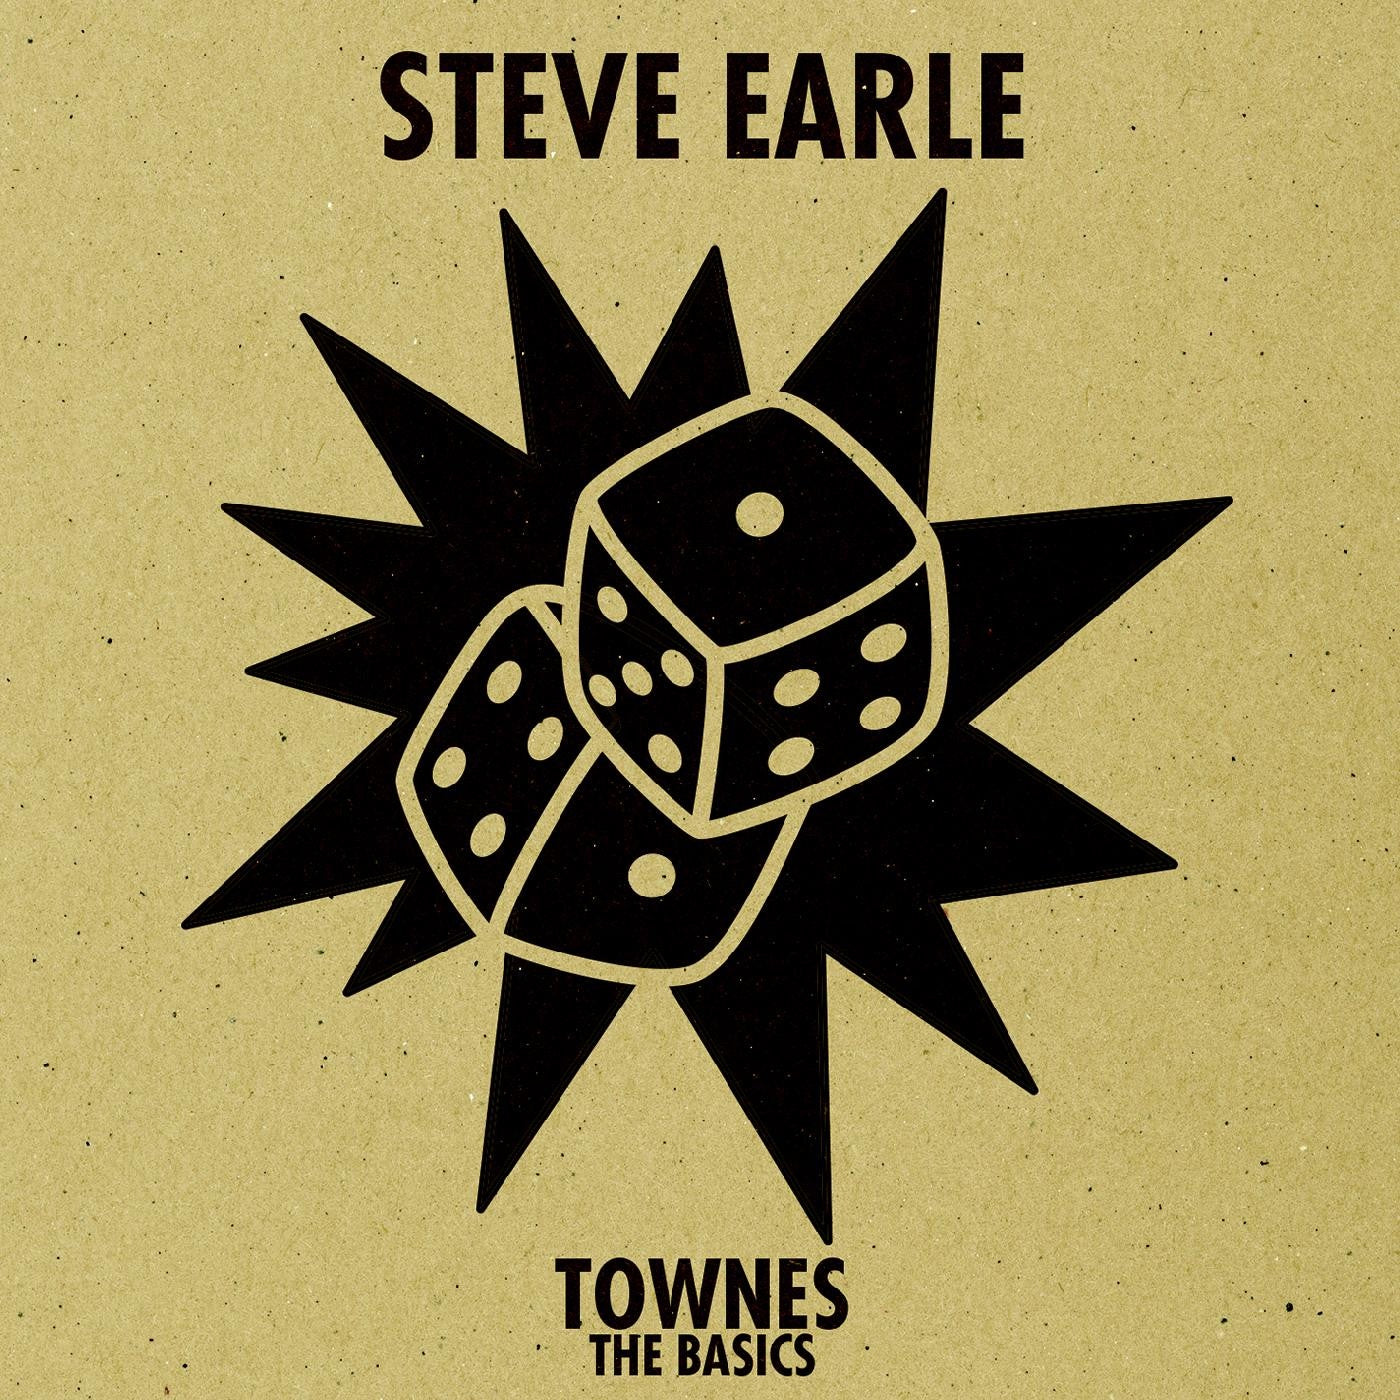 Steve Earle – Townes: The Basics (2009) - New LP Record 2021 New West Gold Vinyl - Country / Folk